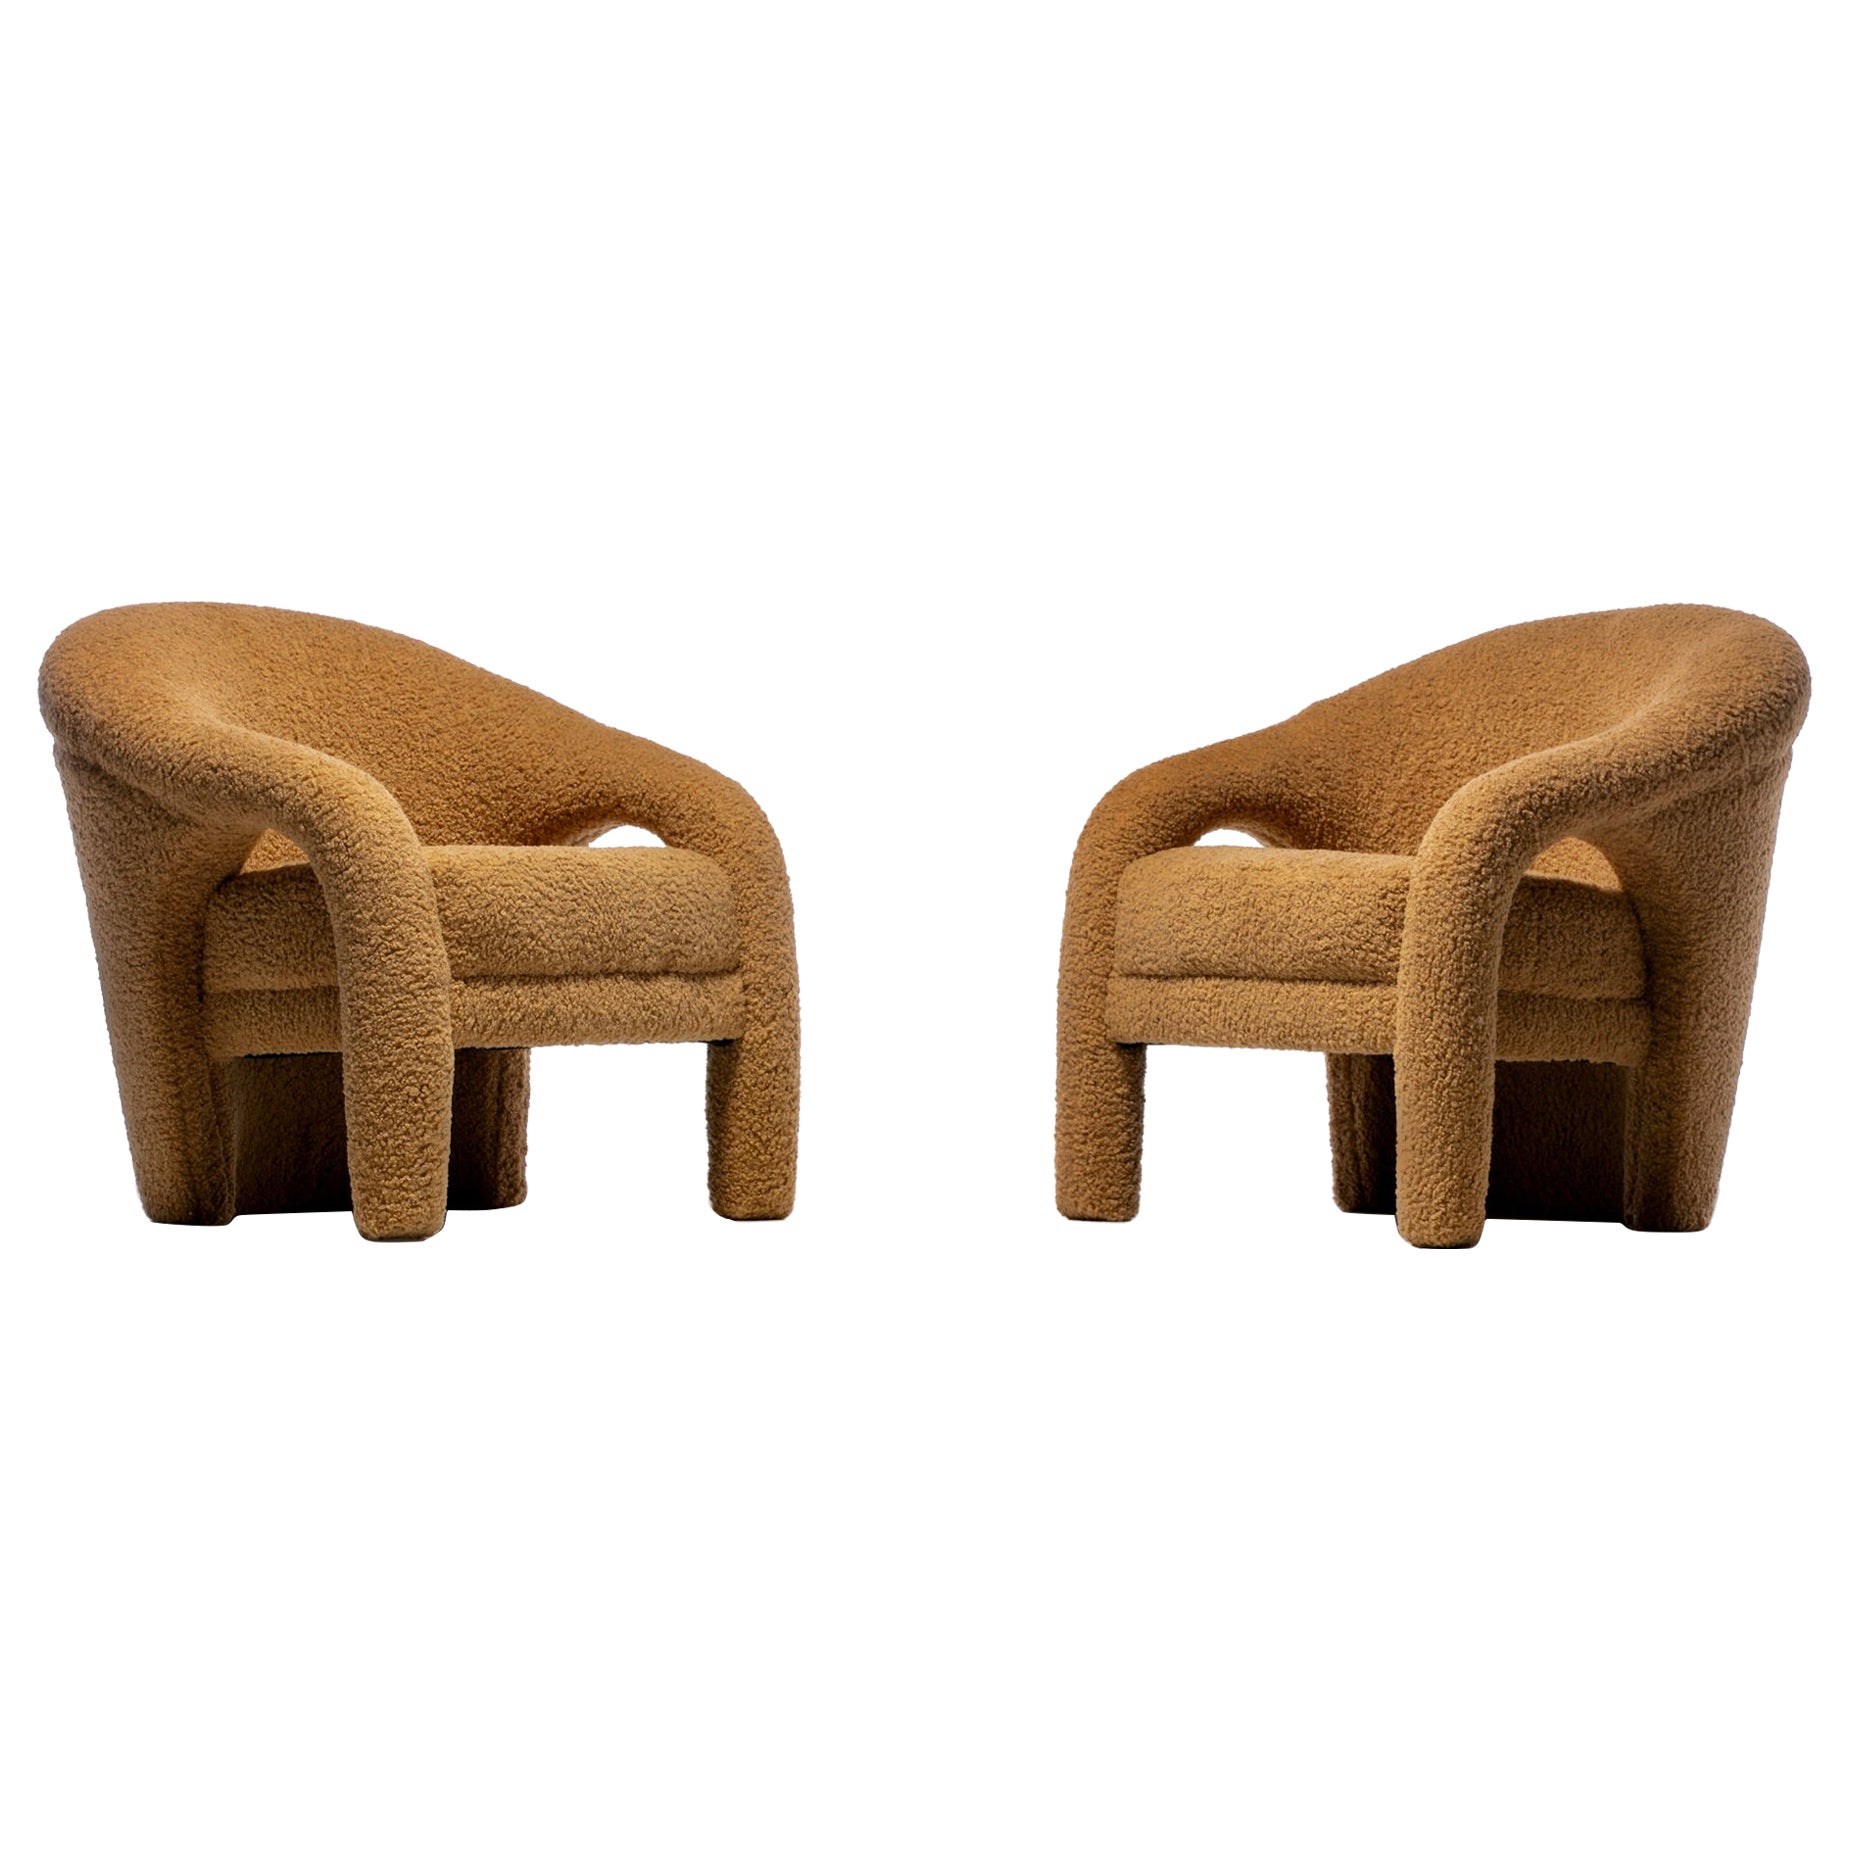 Pair of Weiman Post Modern Lounge Chairs Newly Upholstered in Latte Bouclé